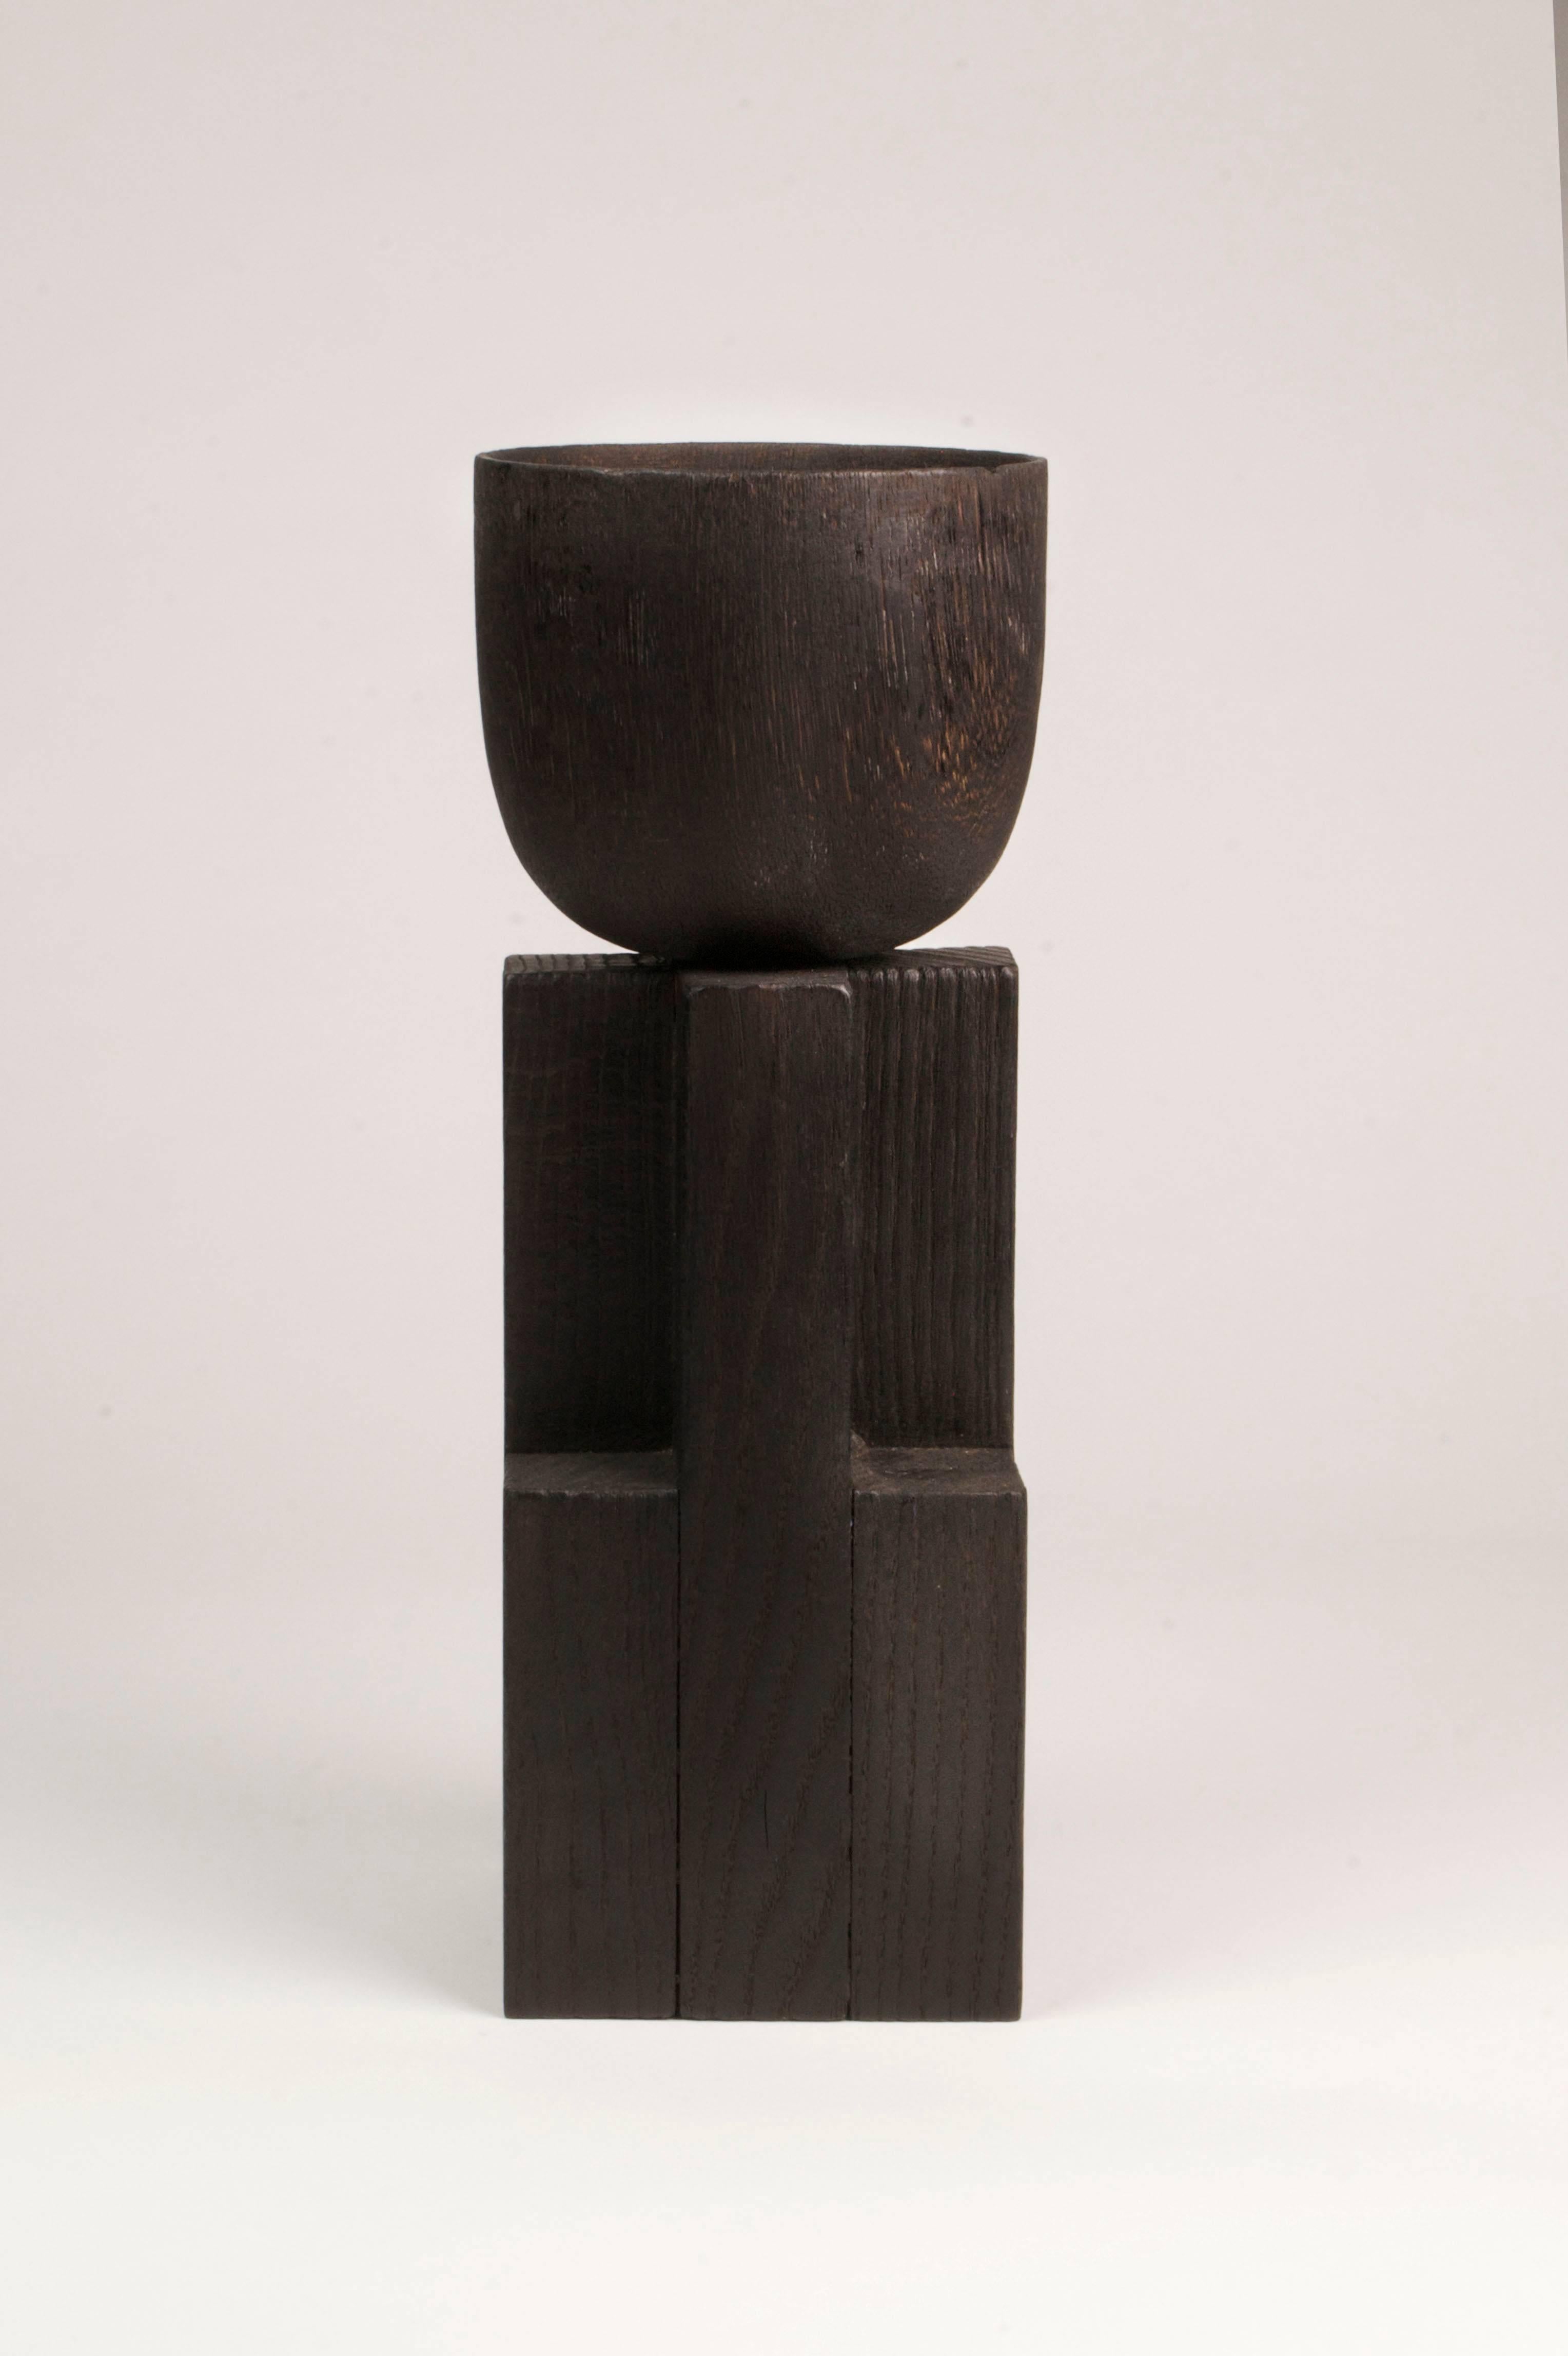 Other Pair of Goblet Bowl, Iroko and Oak, Signed Arno Declercq